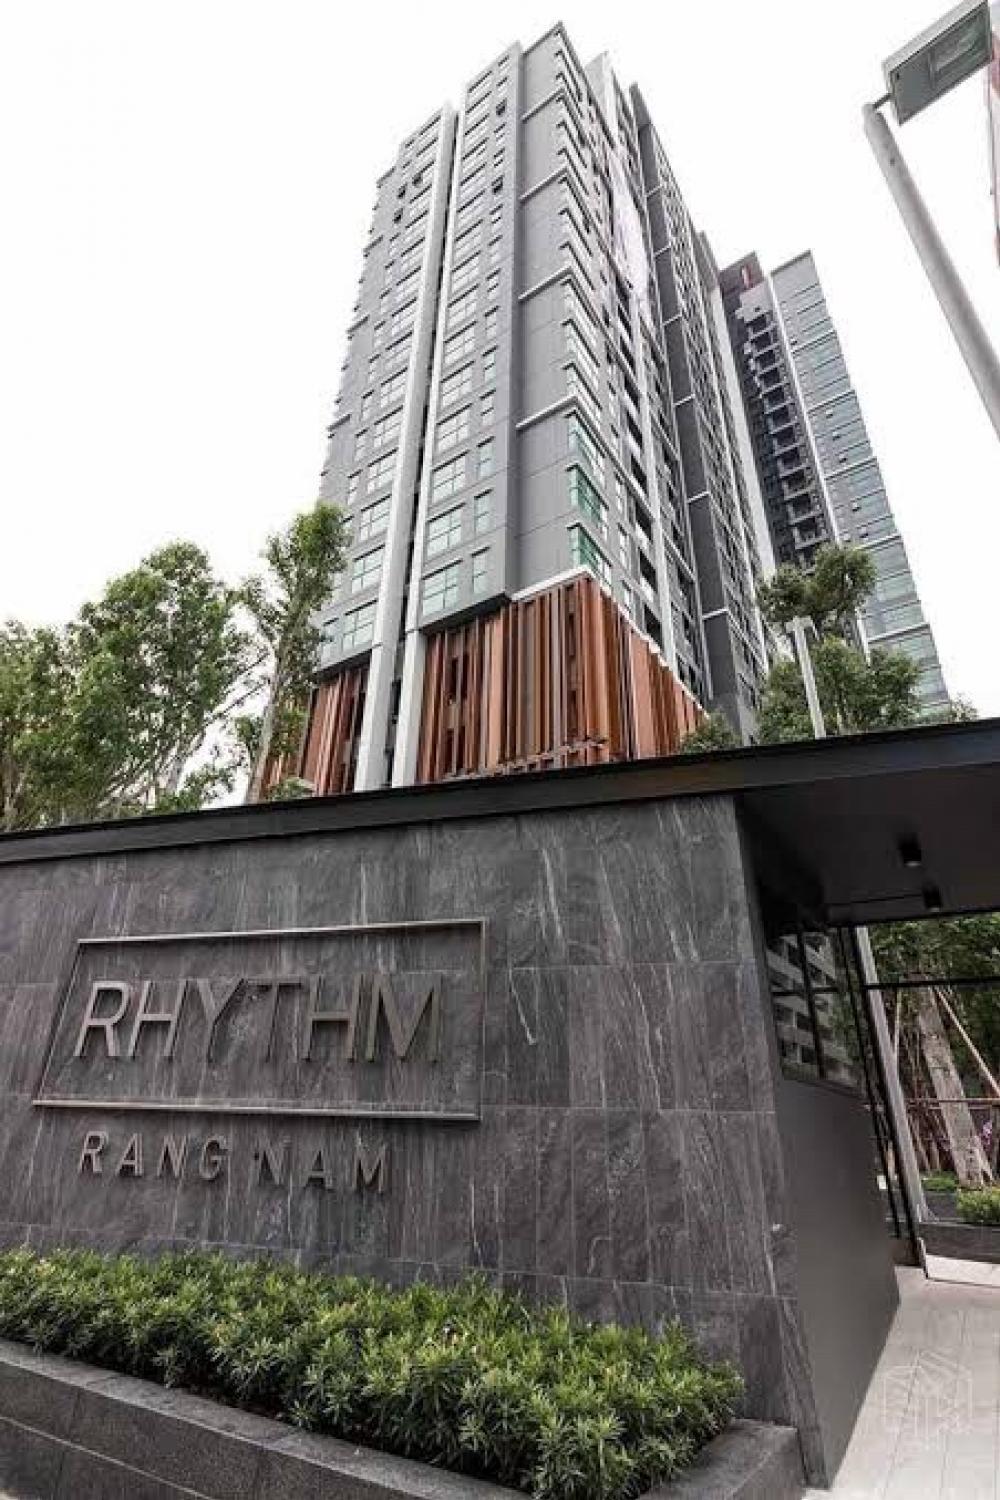 For SaleCondoRatchathewi,Phayathai : For Sale, Rhythm Rangnam, 1 bedroom, 35 sq. M, very beautiful decorated The best price is definitely not better than this. High class, cheaper than the market price. Call 0936626541 Nam came.